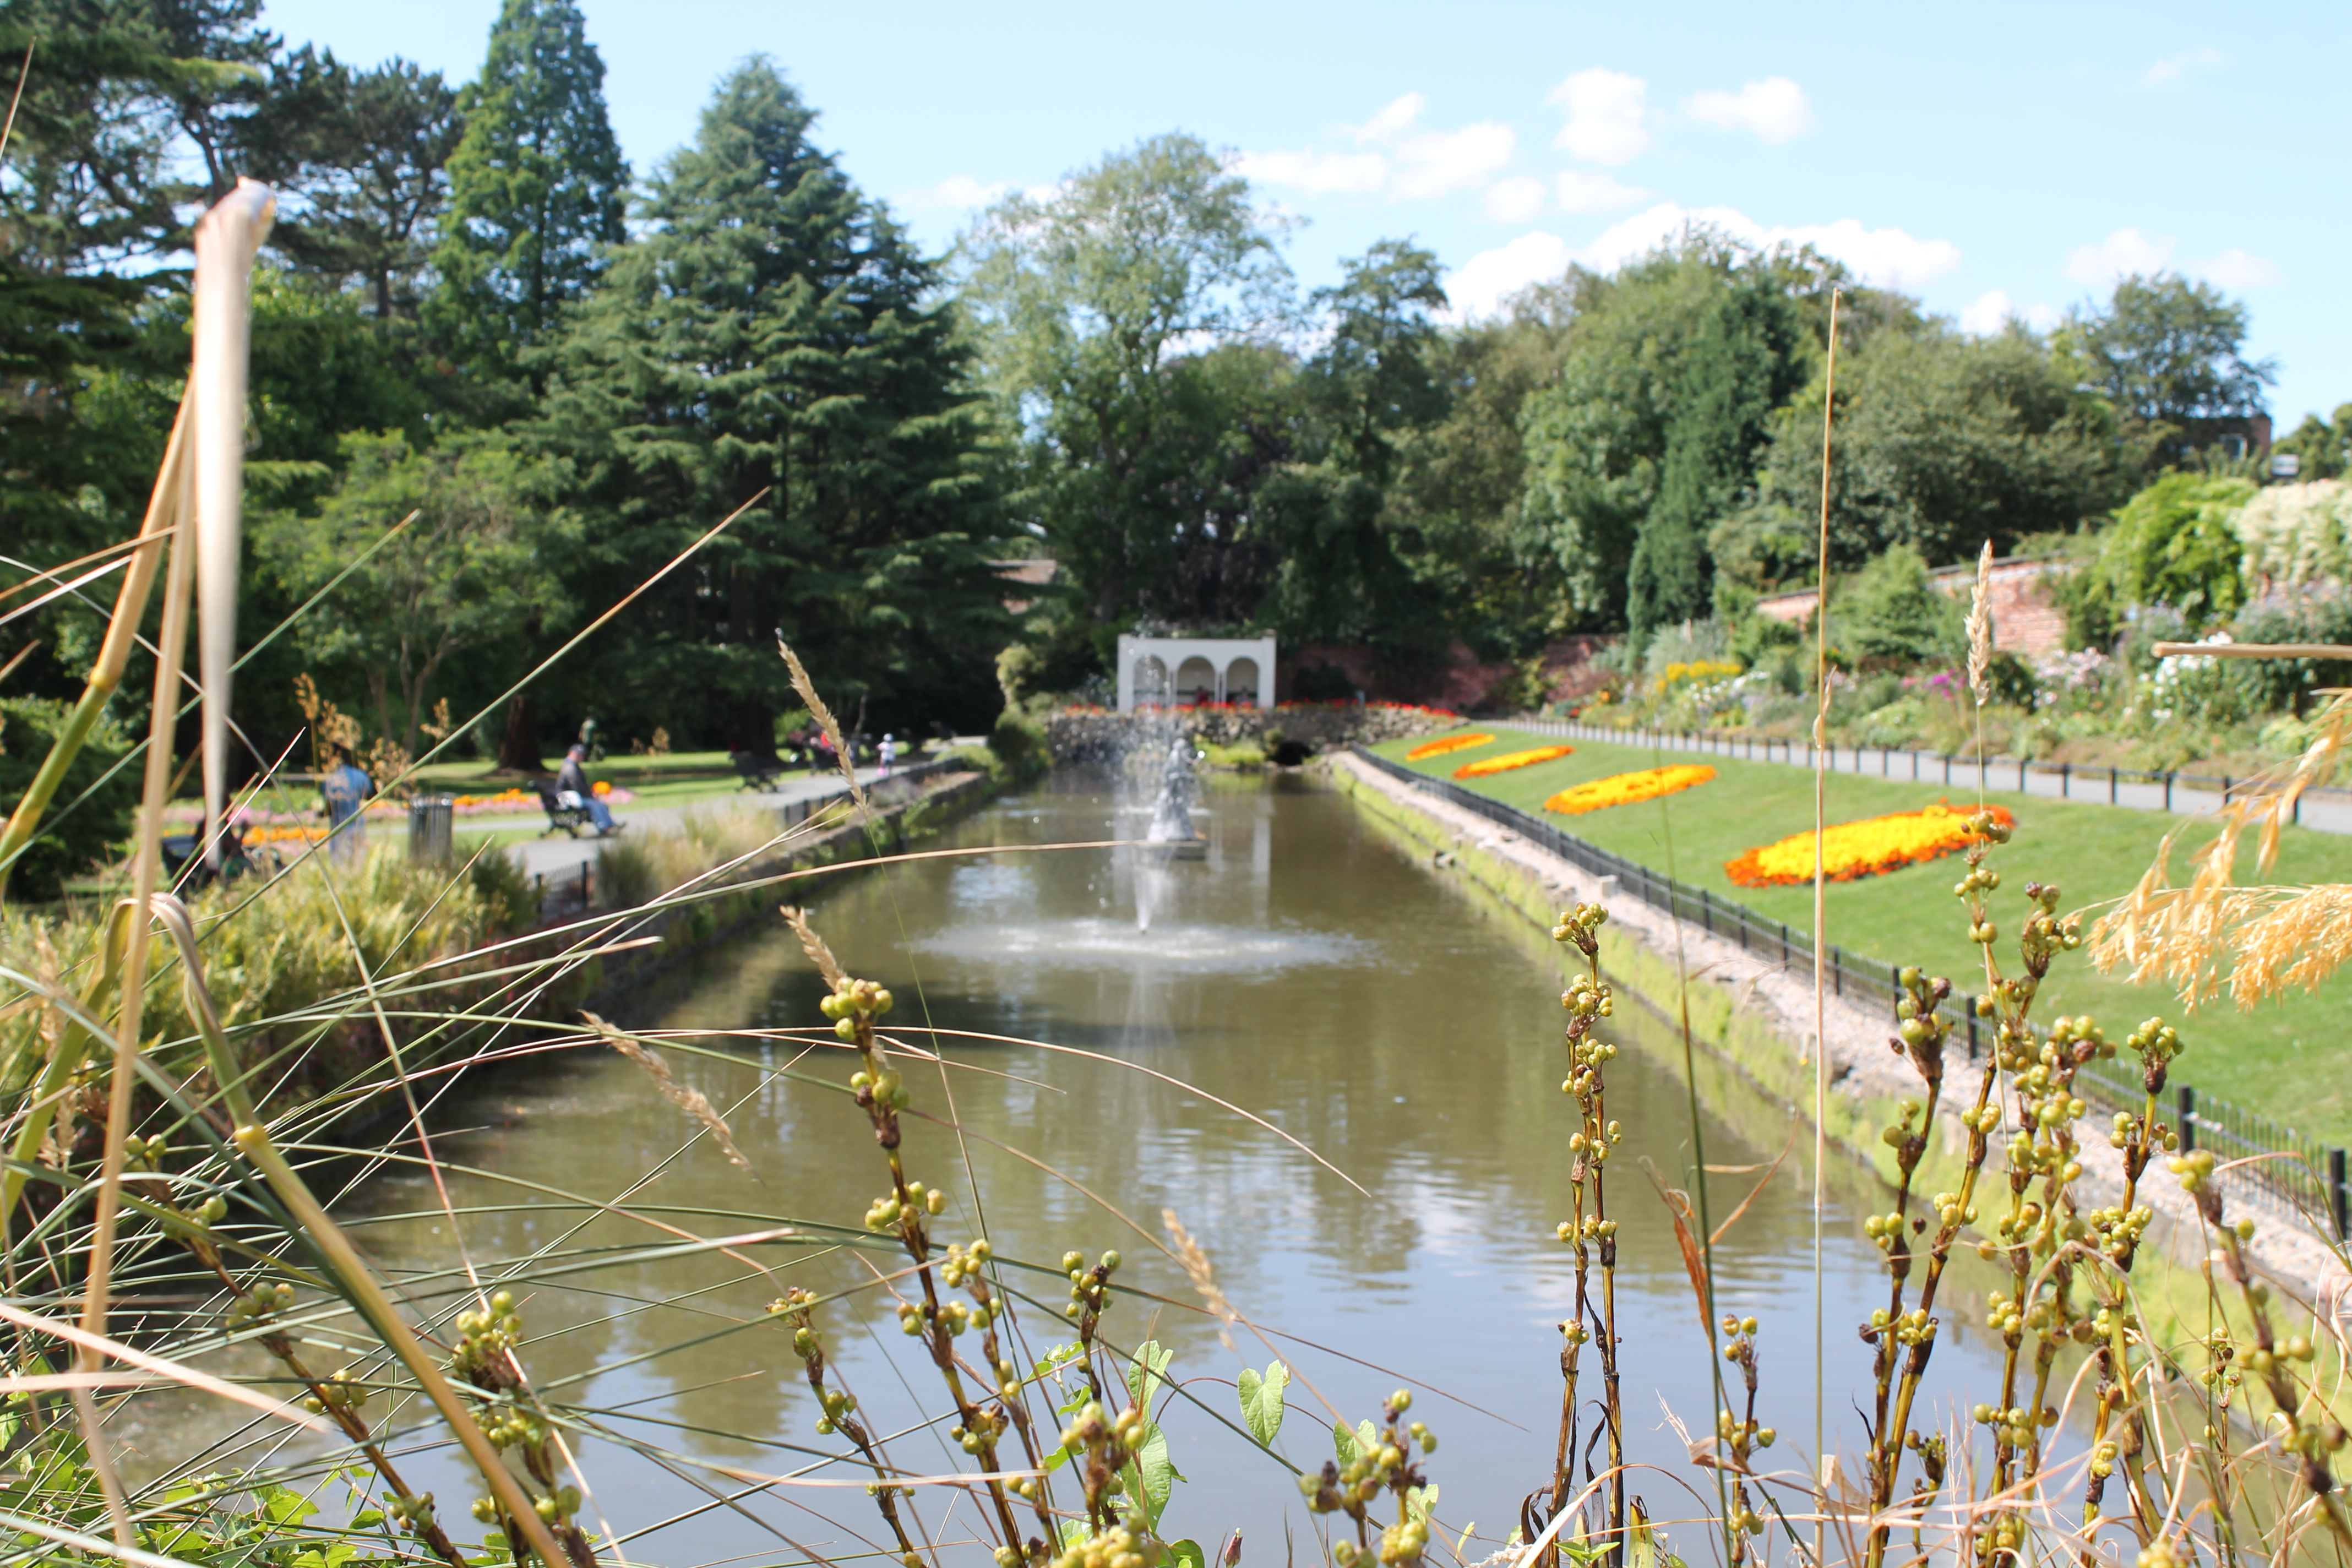 Roundhay Park and Tropical World